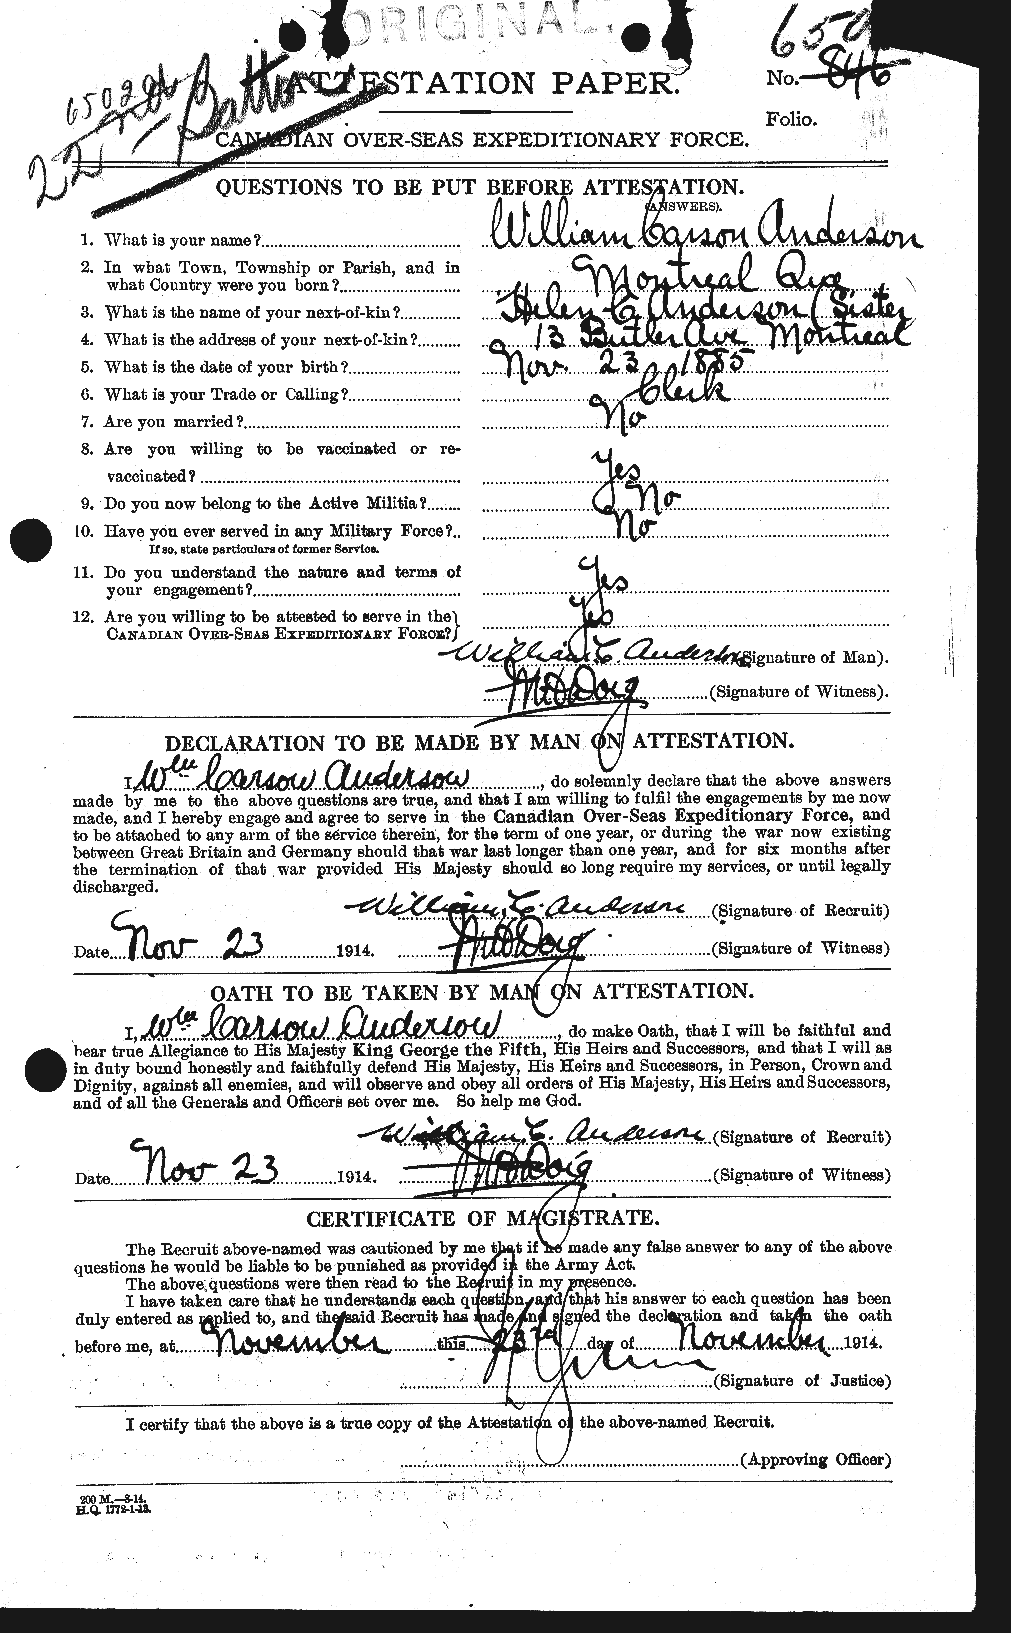 Personnel Records of the First World War - CEF 210781a